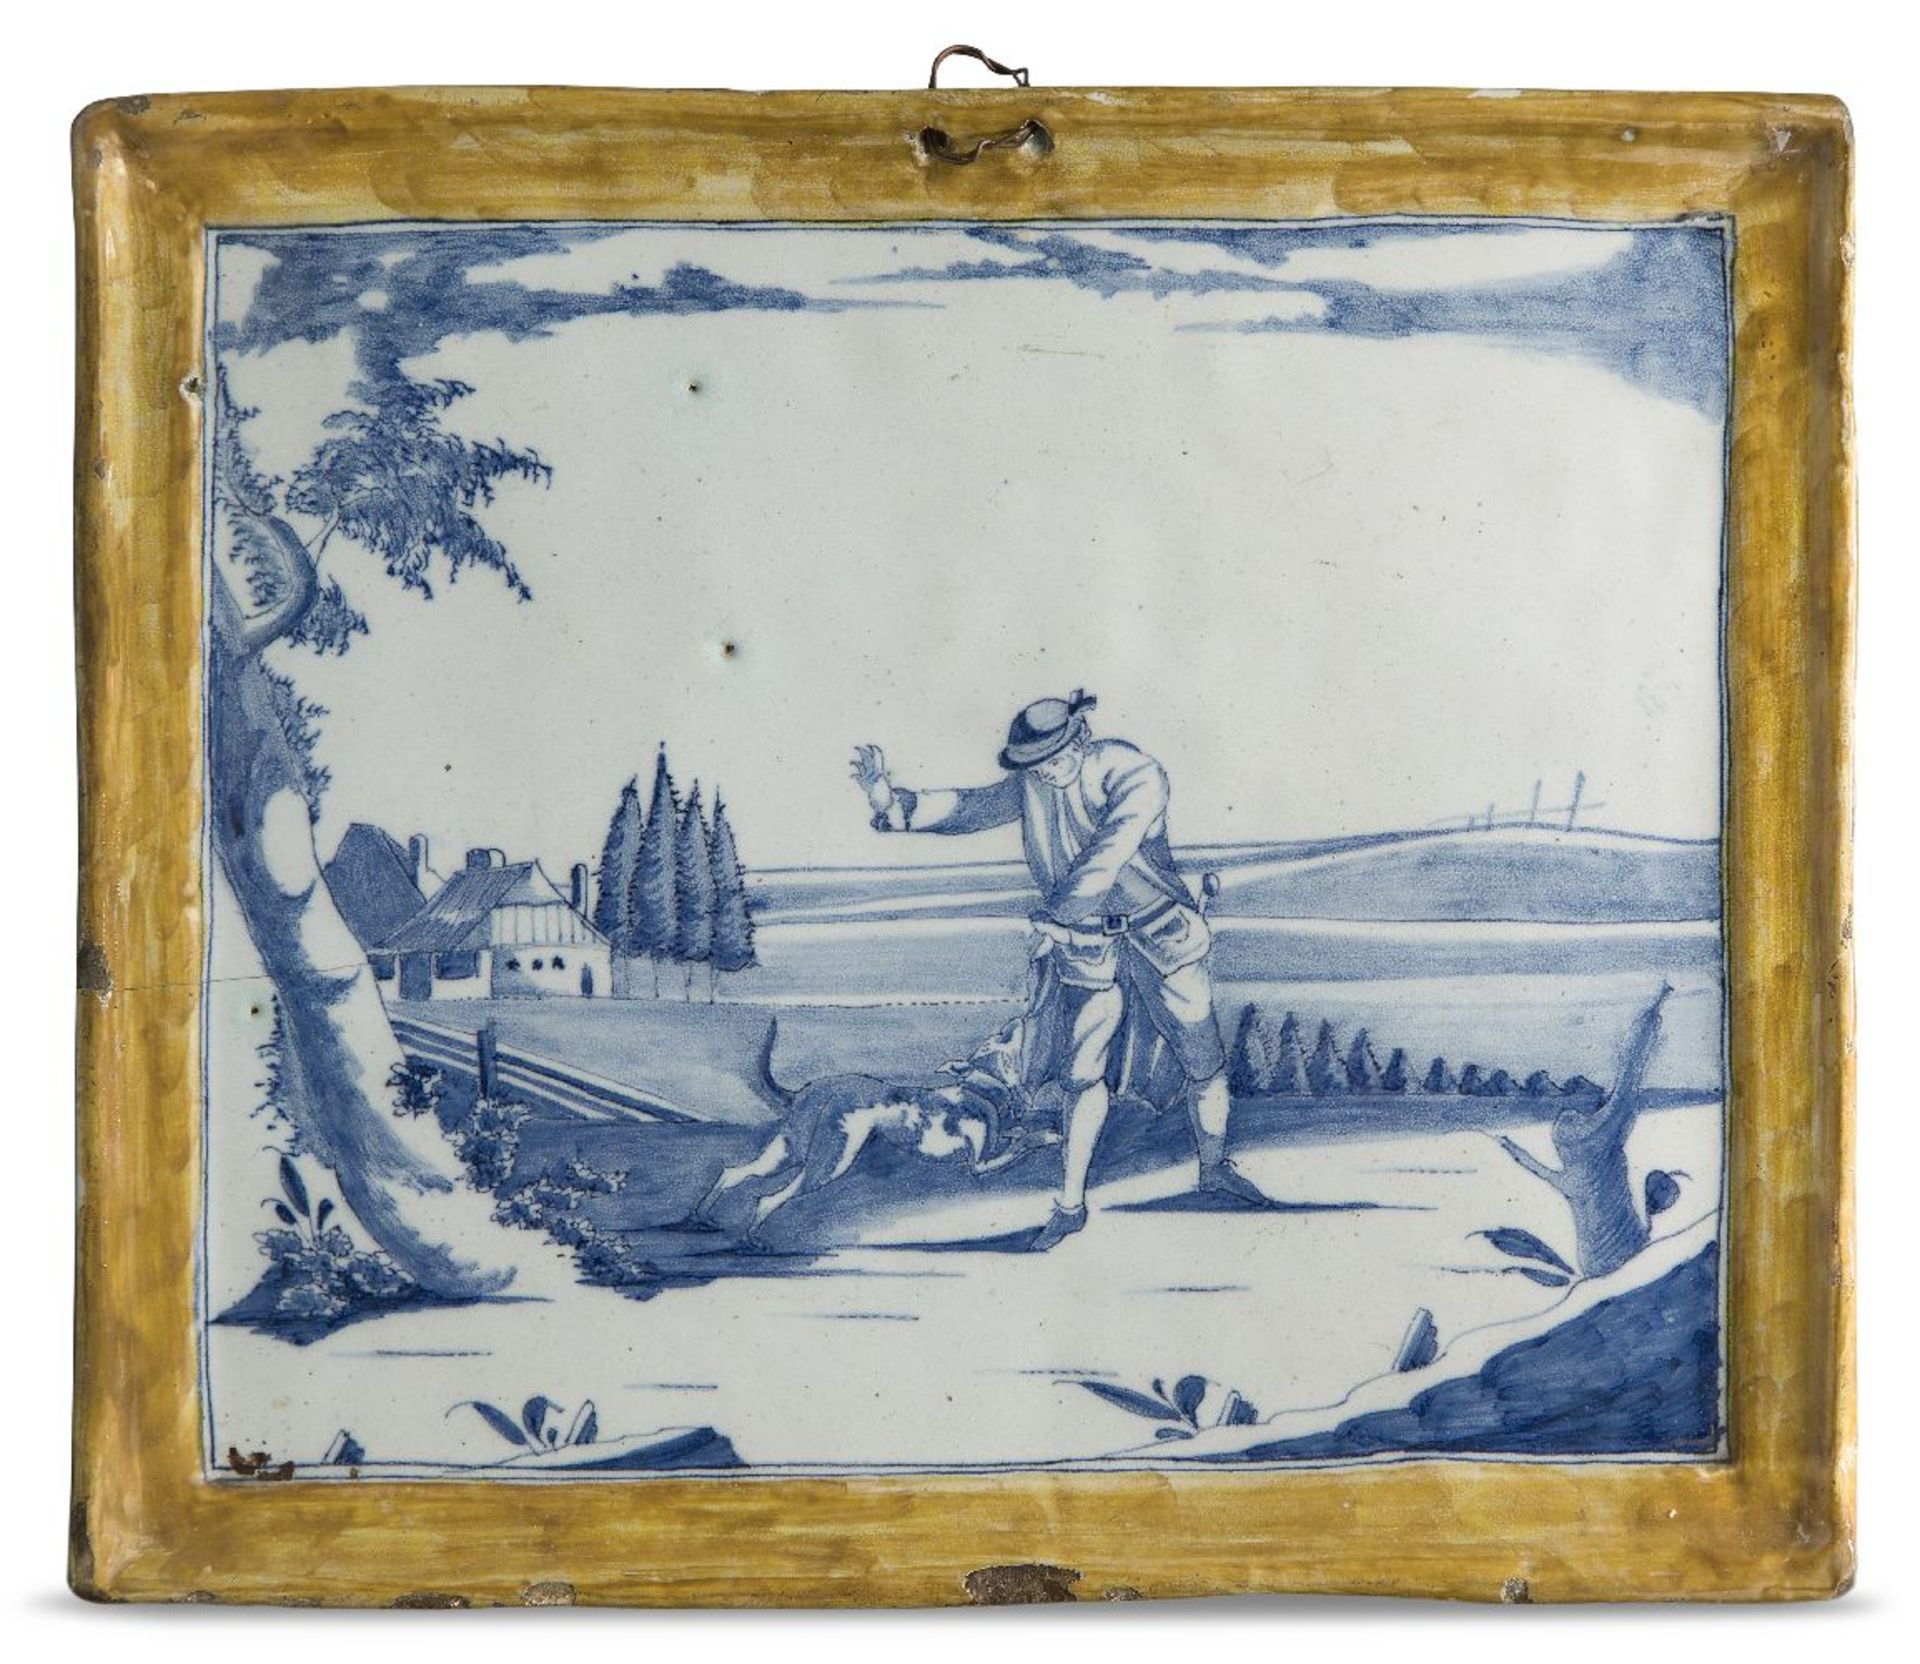 A Delft blue and white plaque, c.1760, decorated with a landscape scene featuring a dog and its